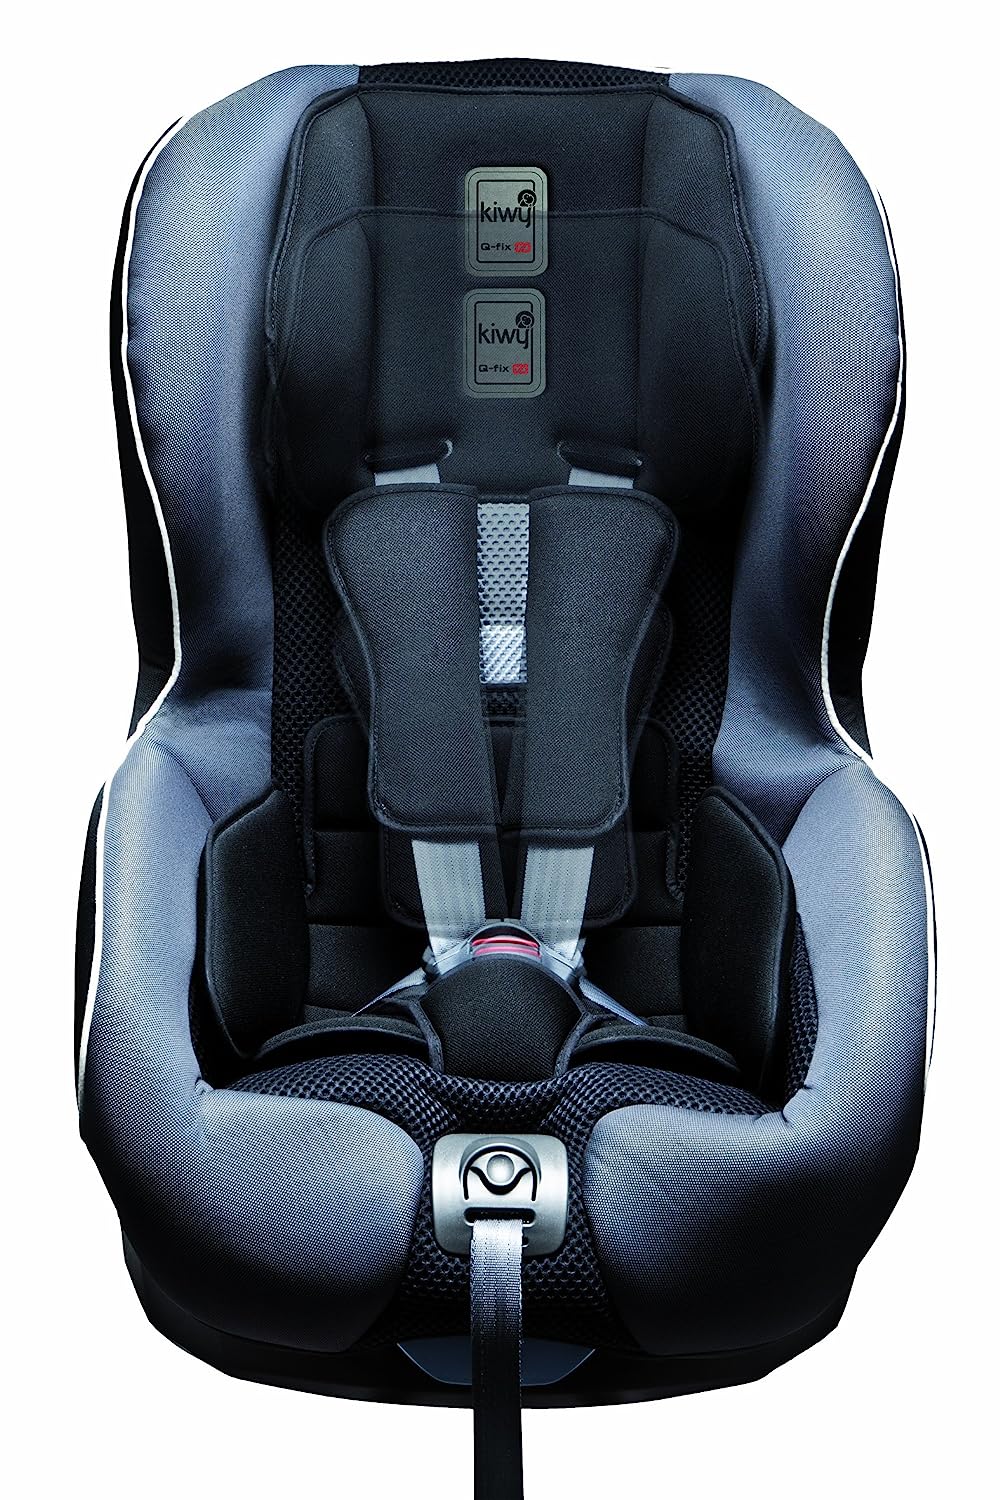 Kiwy 14011KW02B Child Car Seat GRUPPE1 1 with Isofix and Shock-Absorber-And-Automatic-Tensioning-System Energy Management 9-18 kg carbon black